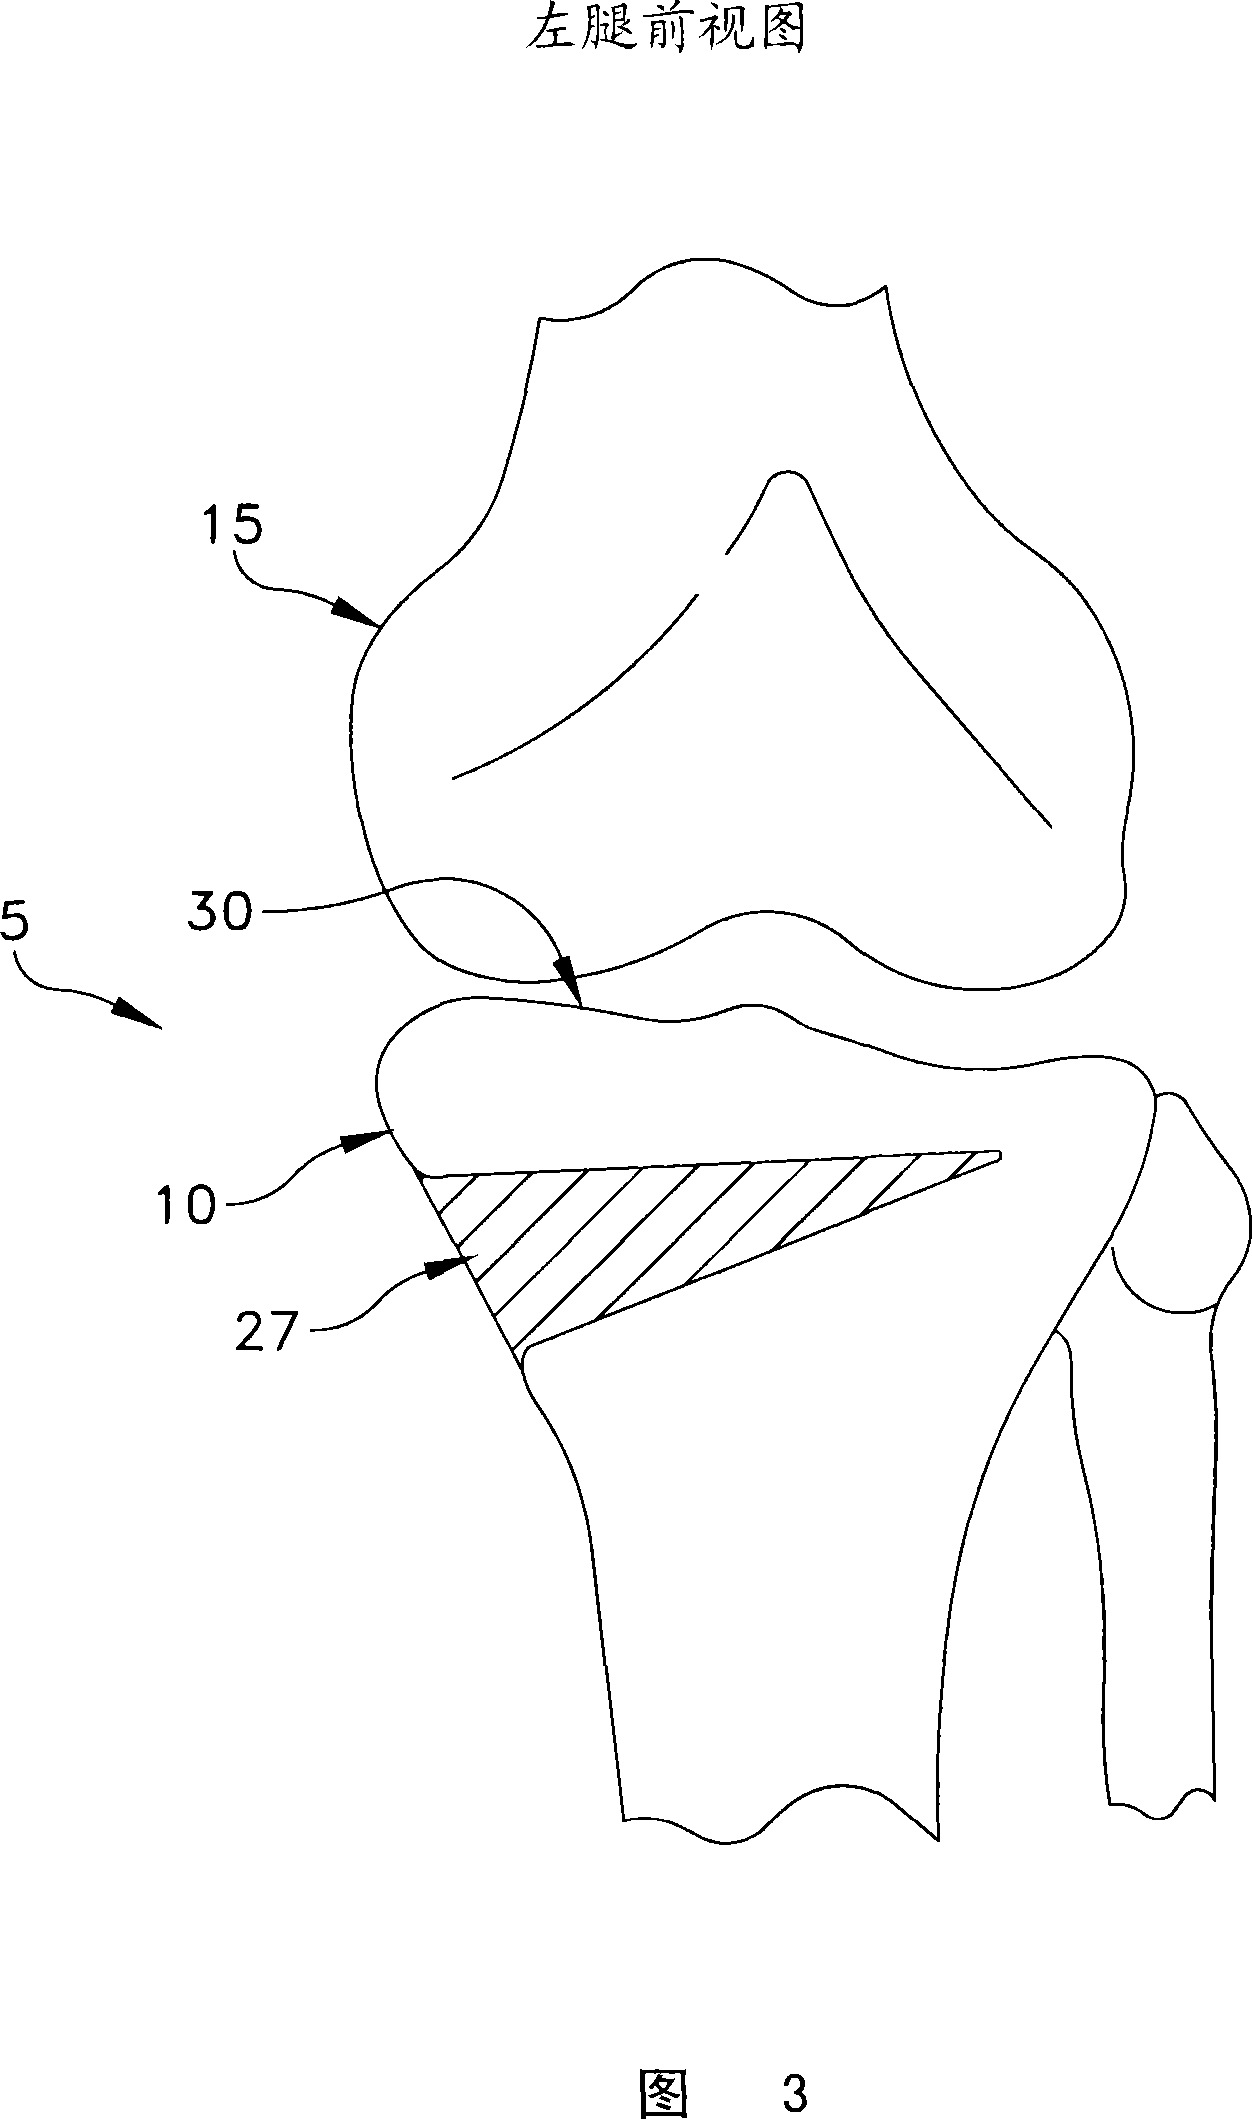 Apparatus for performing an open wedge, high tibial osteotomy